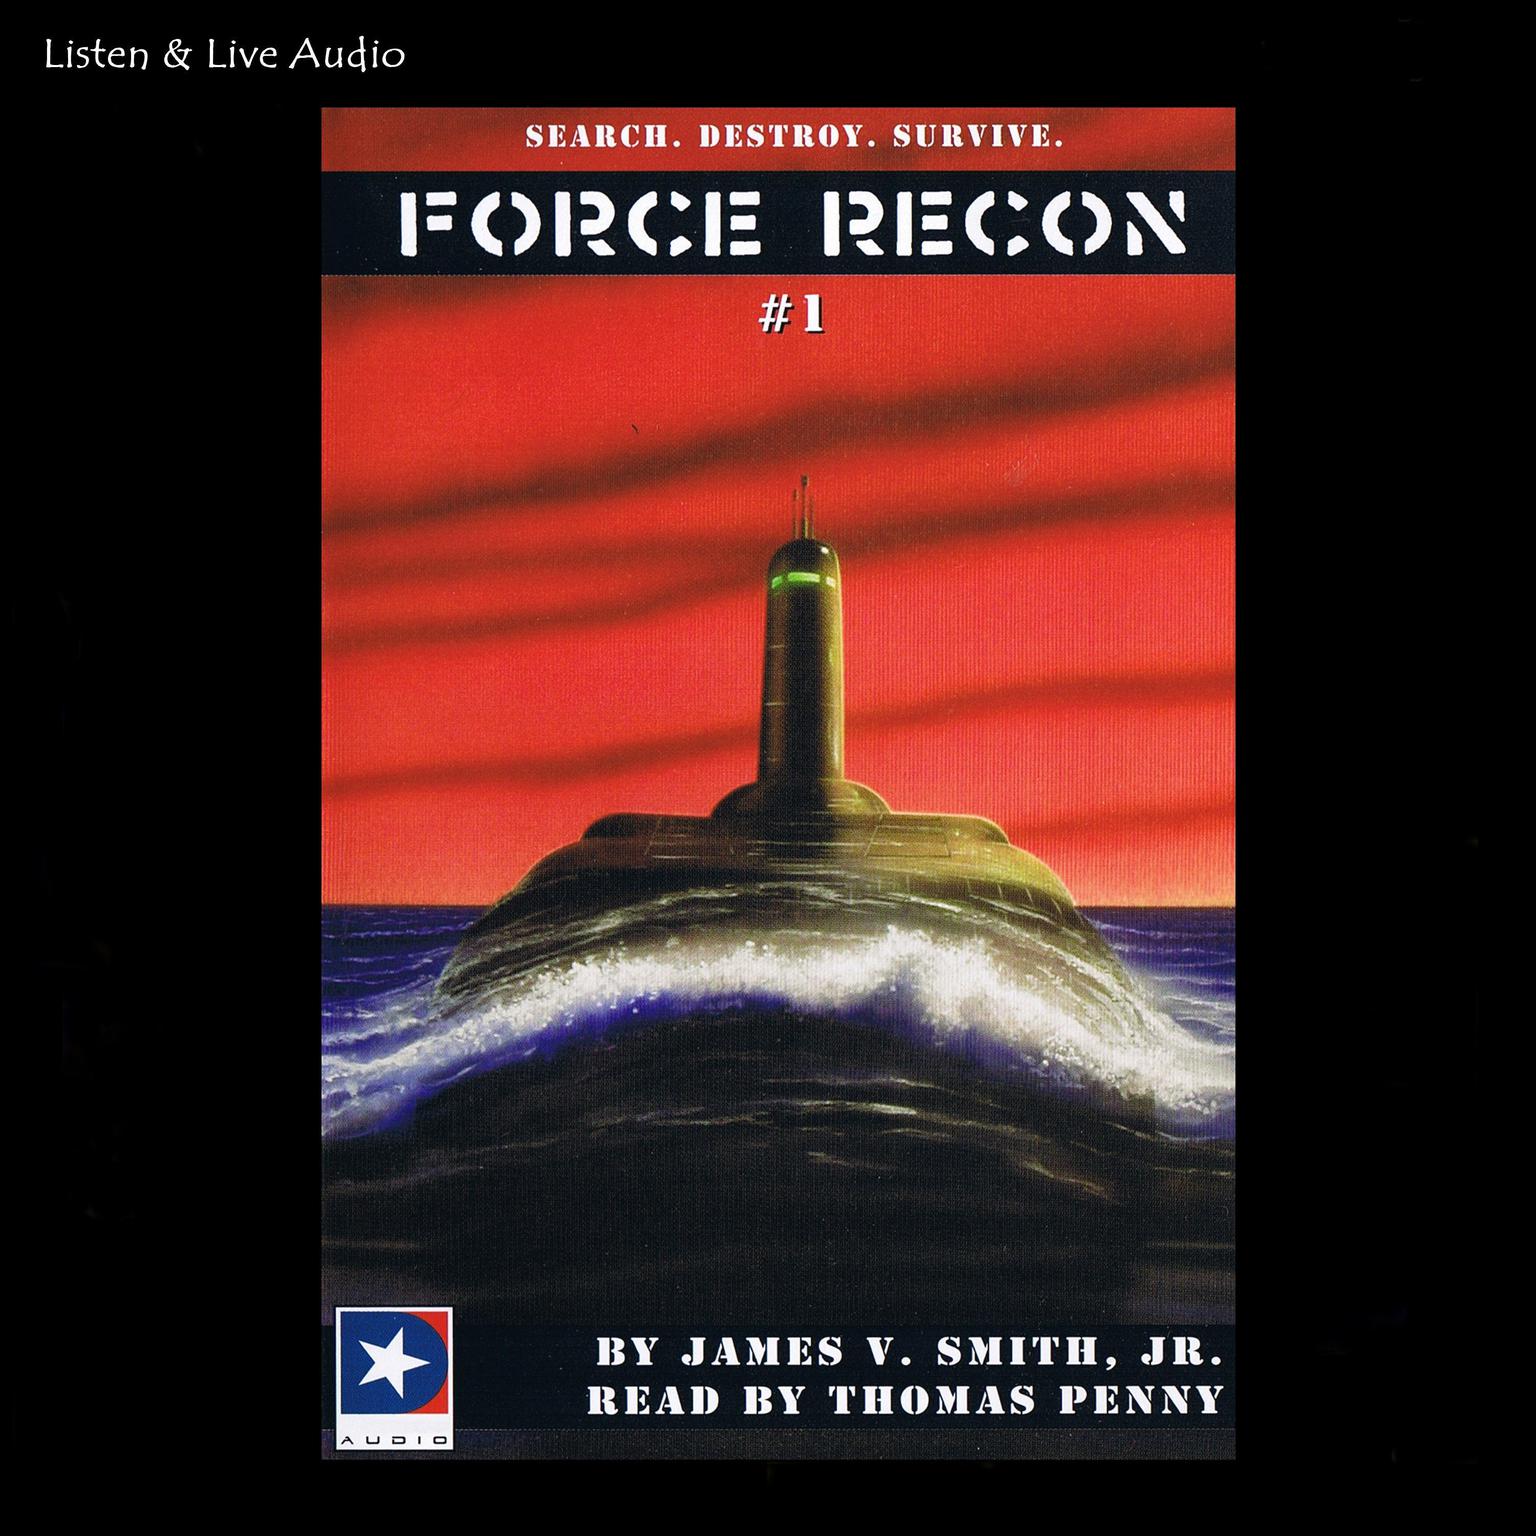 Force Recon #1 Audiobook, by James V. Smith